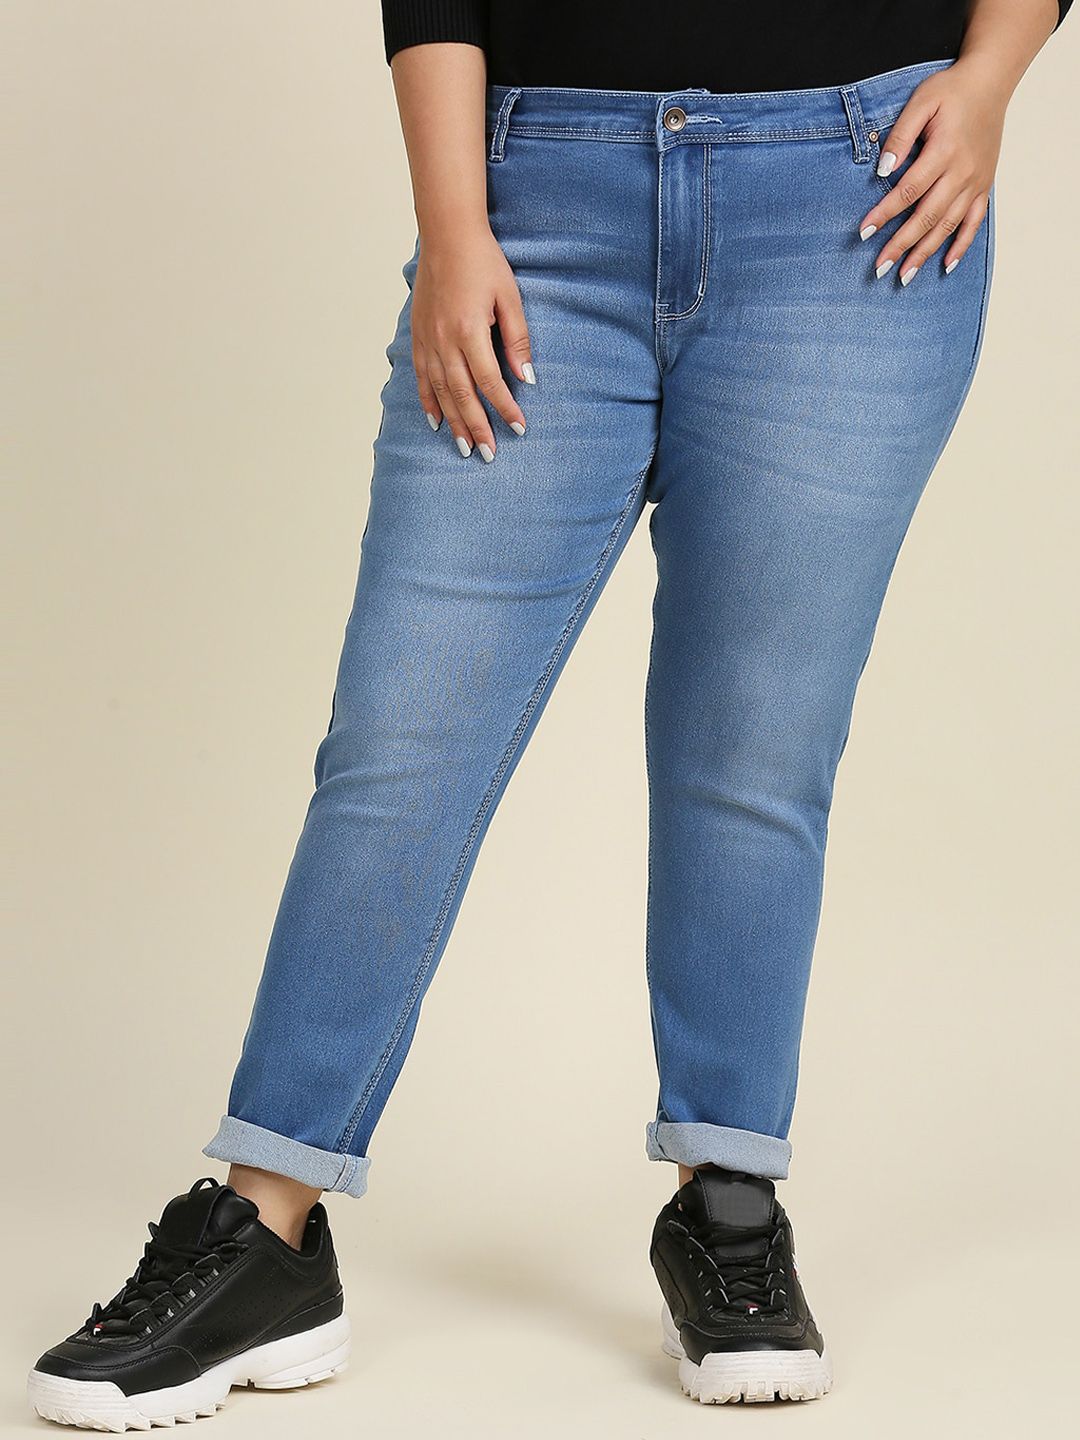 High Star Women Plus Size Blue Slim Fit Light Fade Stretchable Jeans Price in India